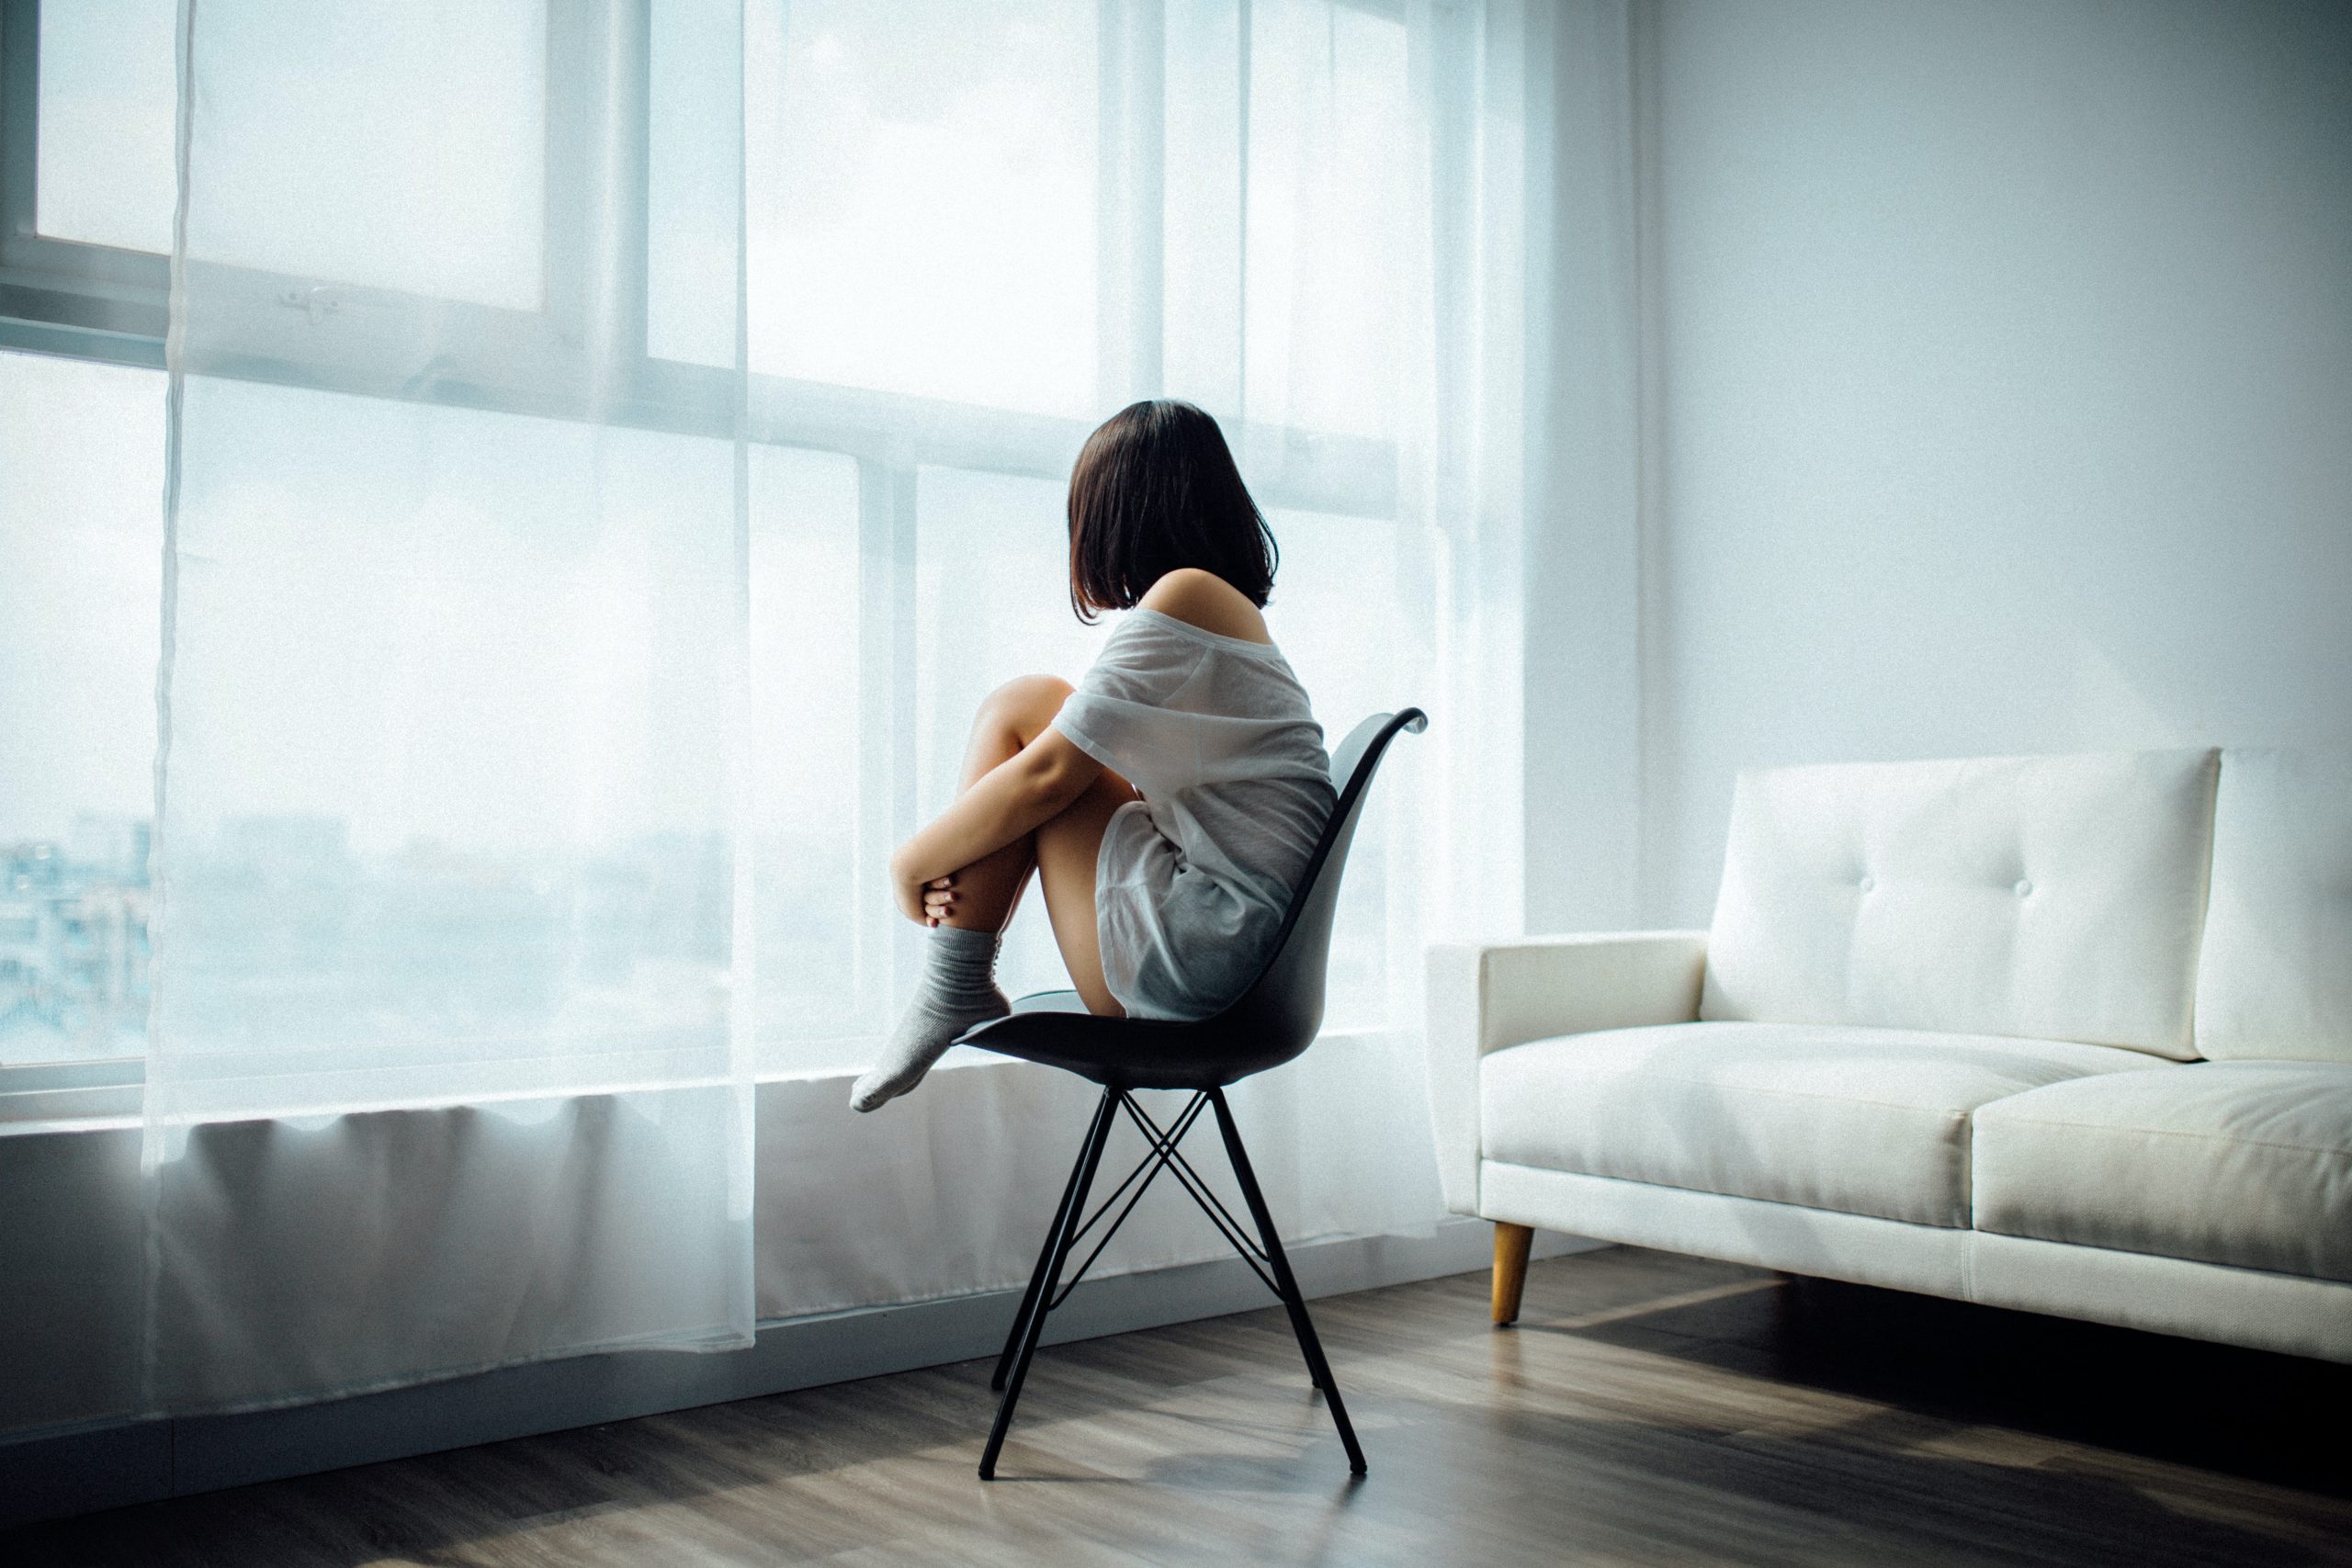 A woman sits alone on a chair facing a window. 